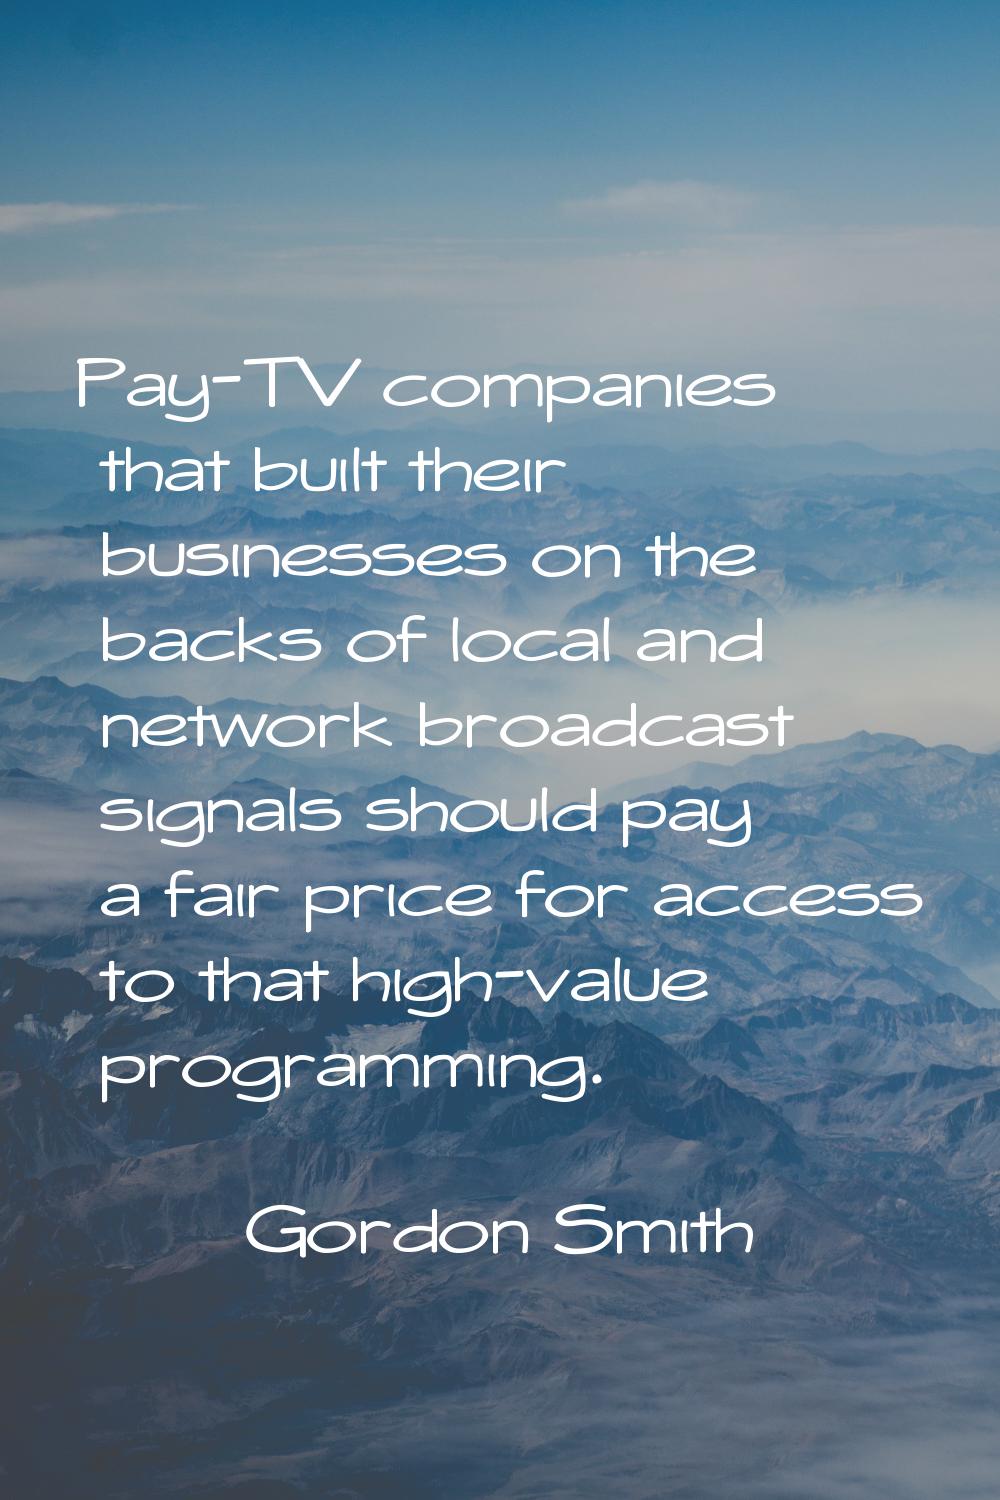 Pay-TV companies that built their businesses on the backs of local and network broadcast signals sh